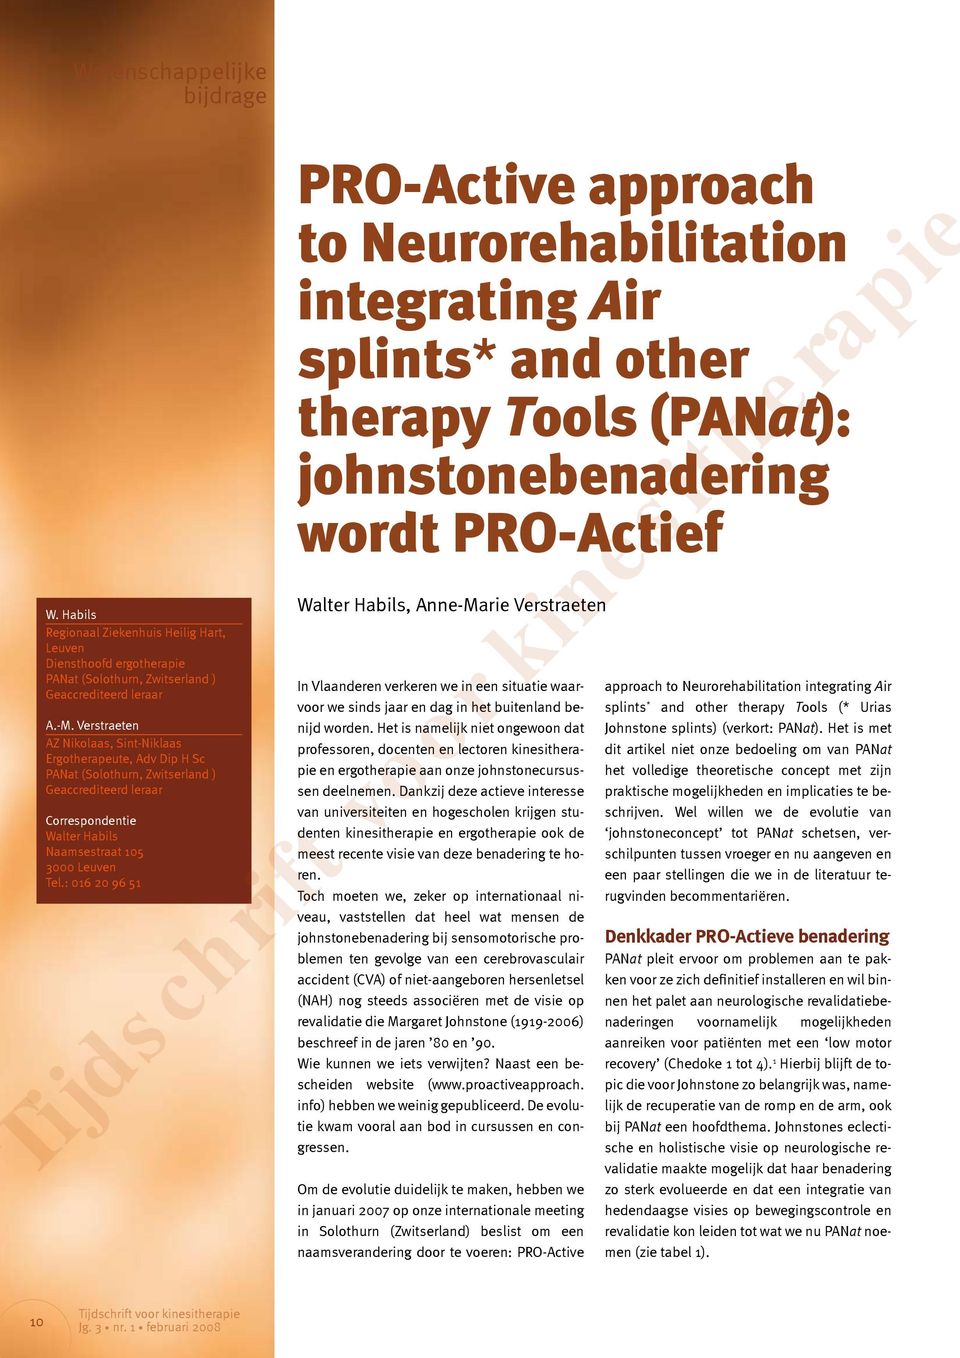 : 016 20 96 51 PRO-Active approach to Neurorehabilitation integrating Air splints* and other therapy Tools (PANat): johnstonebenadering wordt PRO-Actief Walter Habils, Anne-Marie Verstraeten In